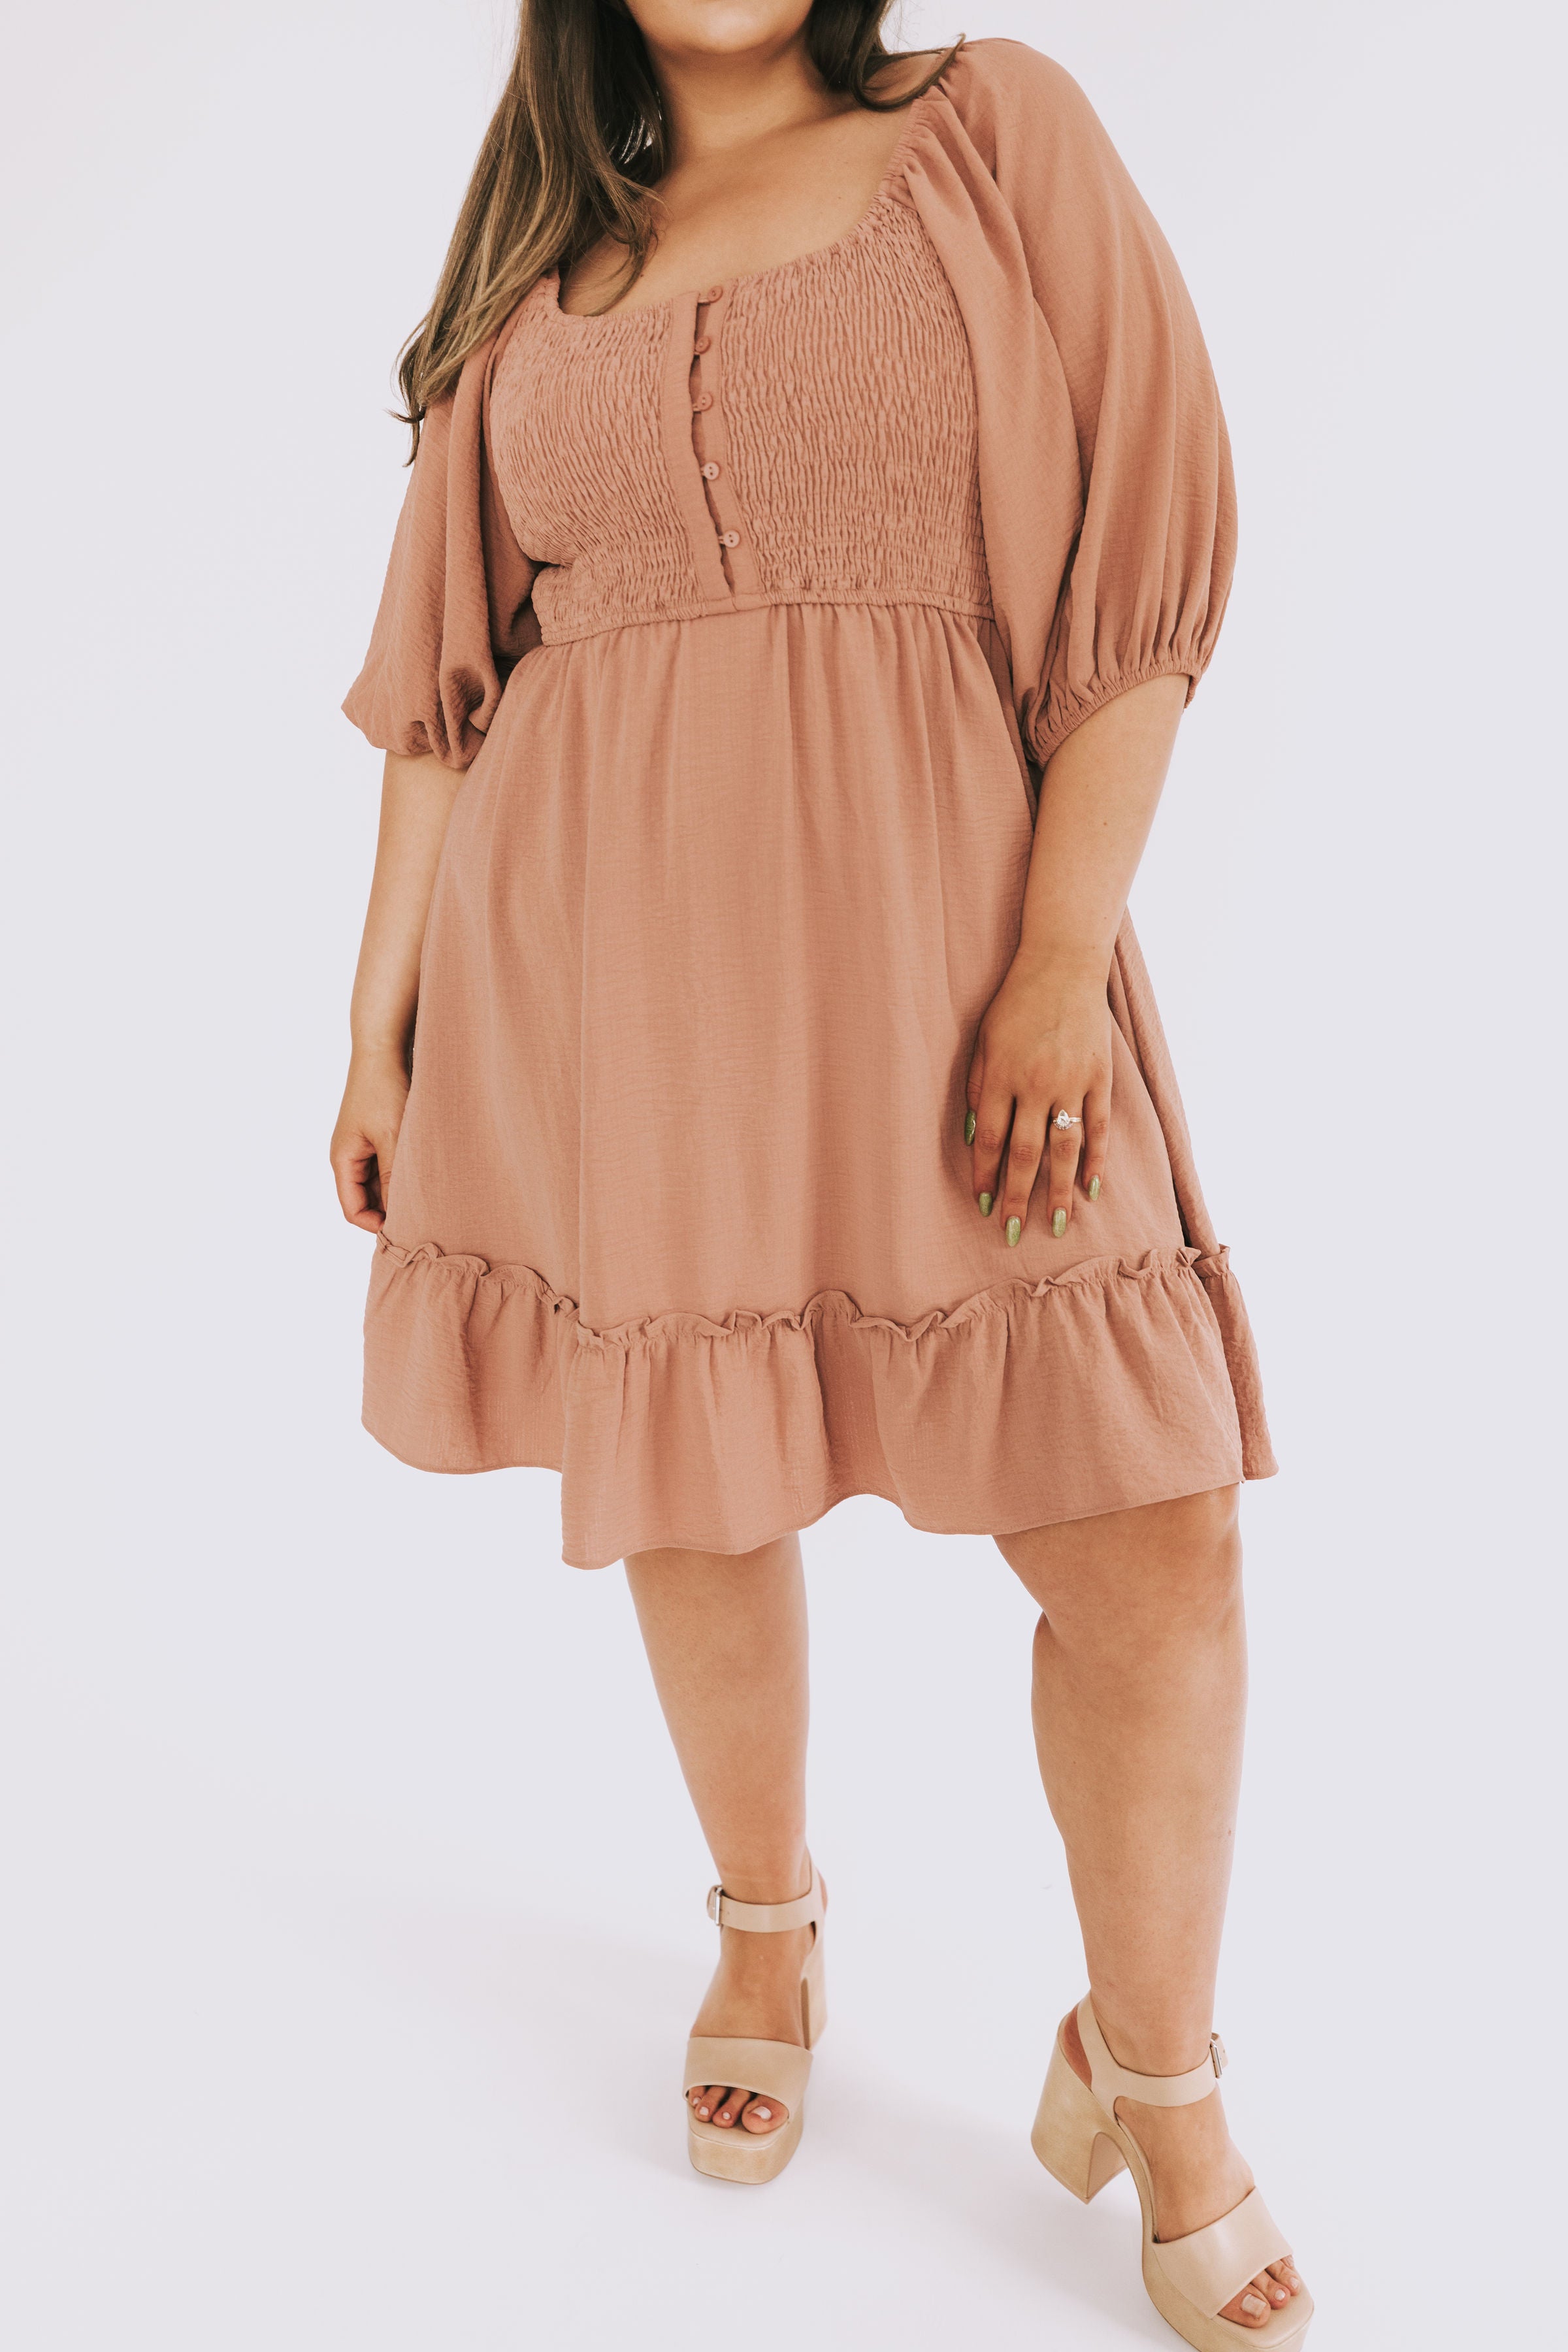 PLUS SIZE - Time With You Dress